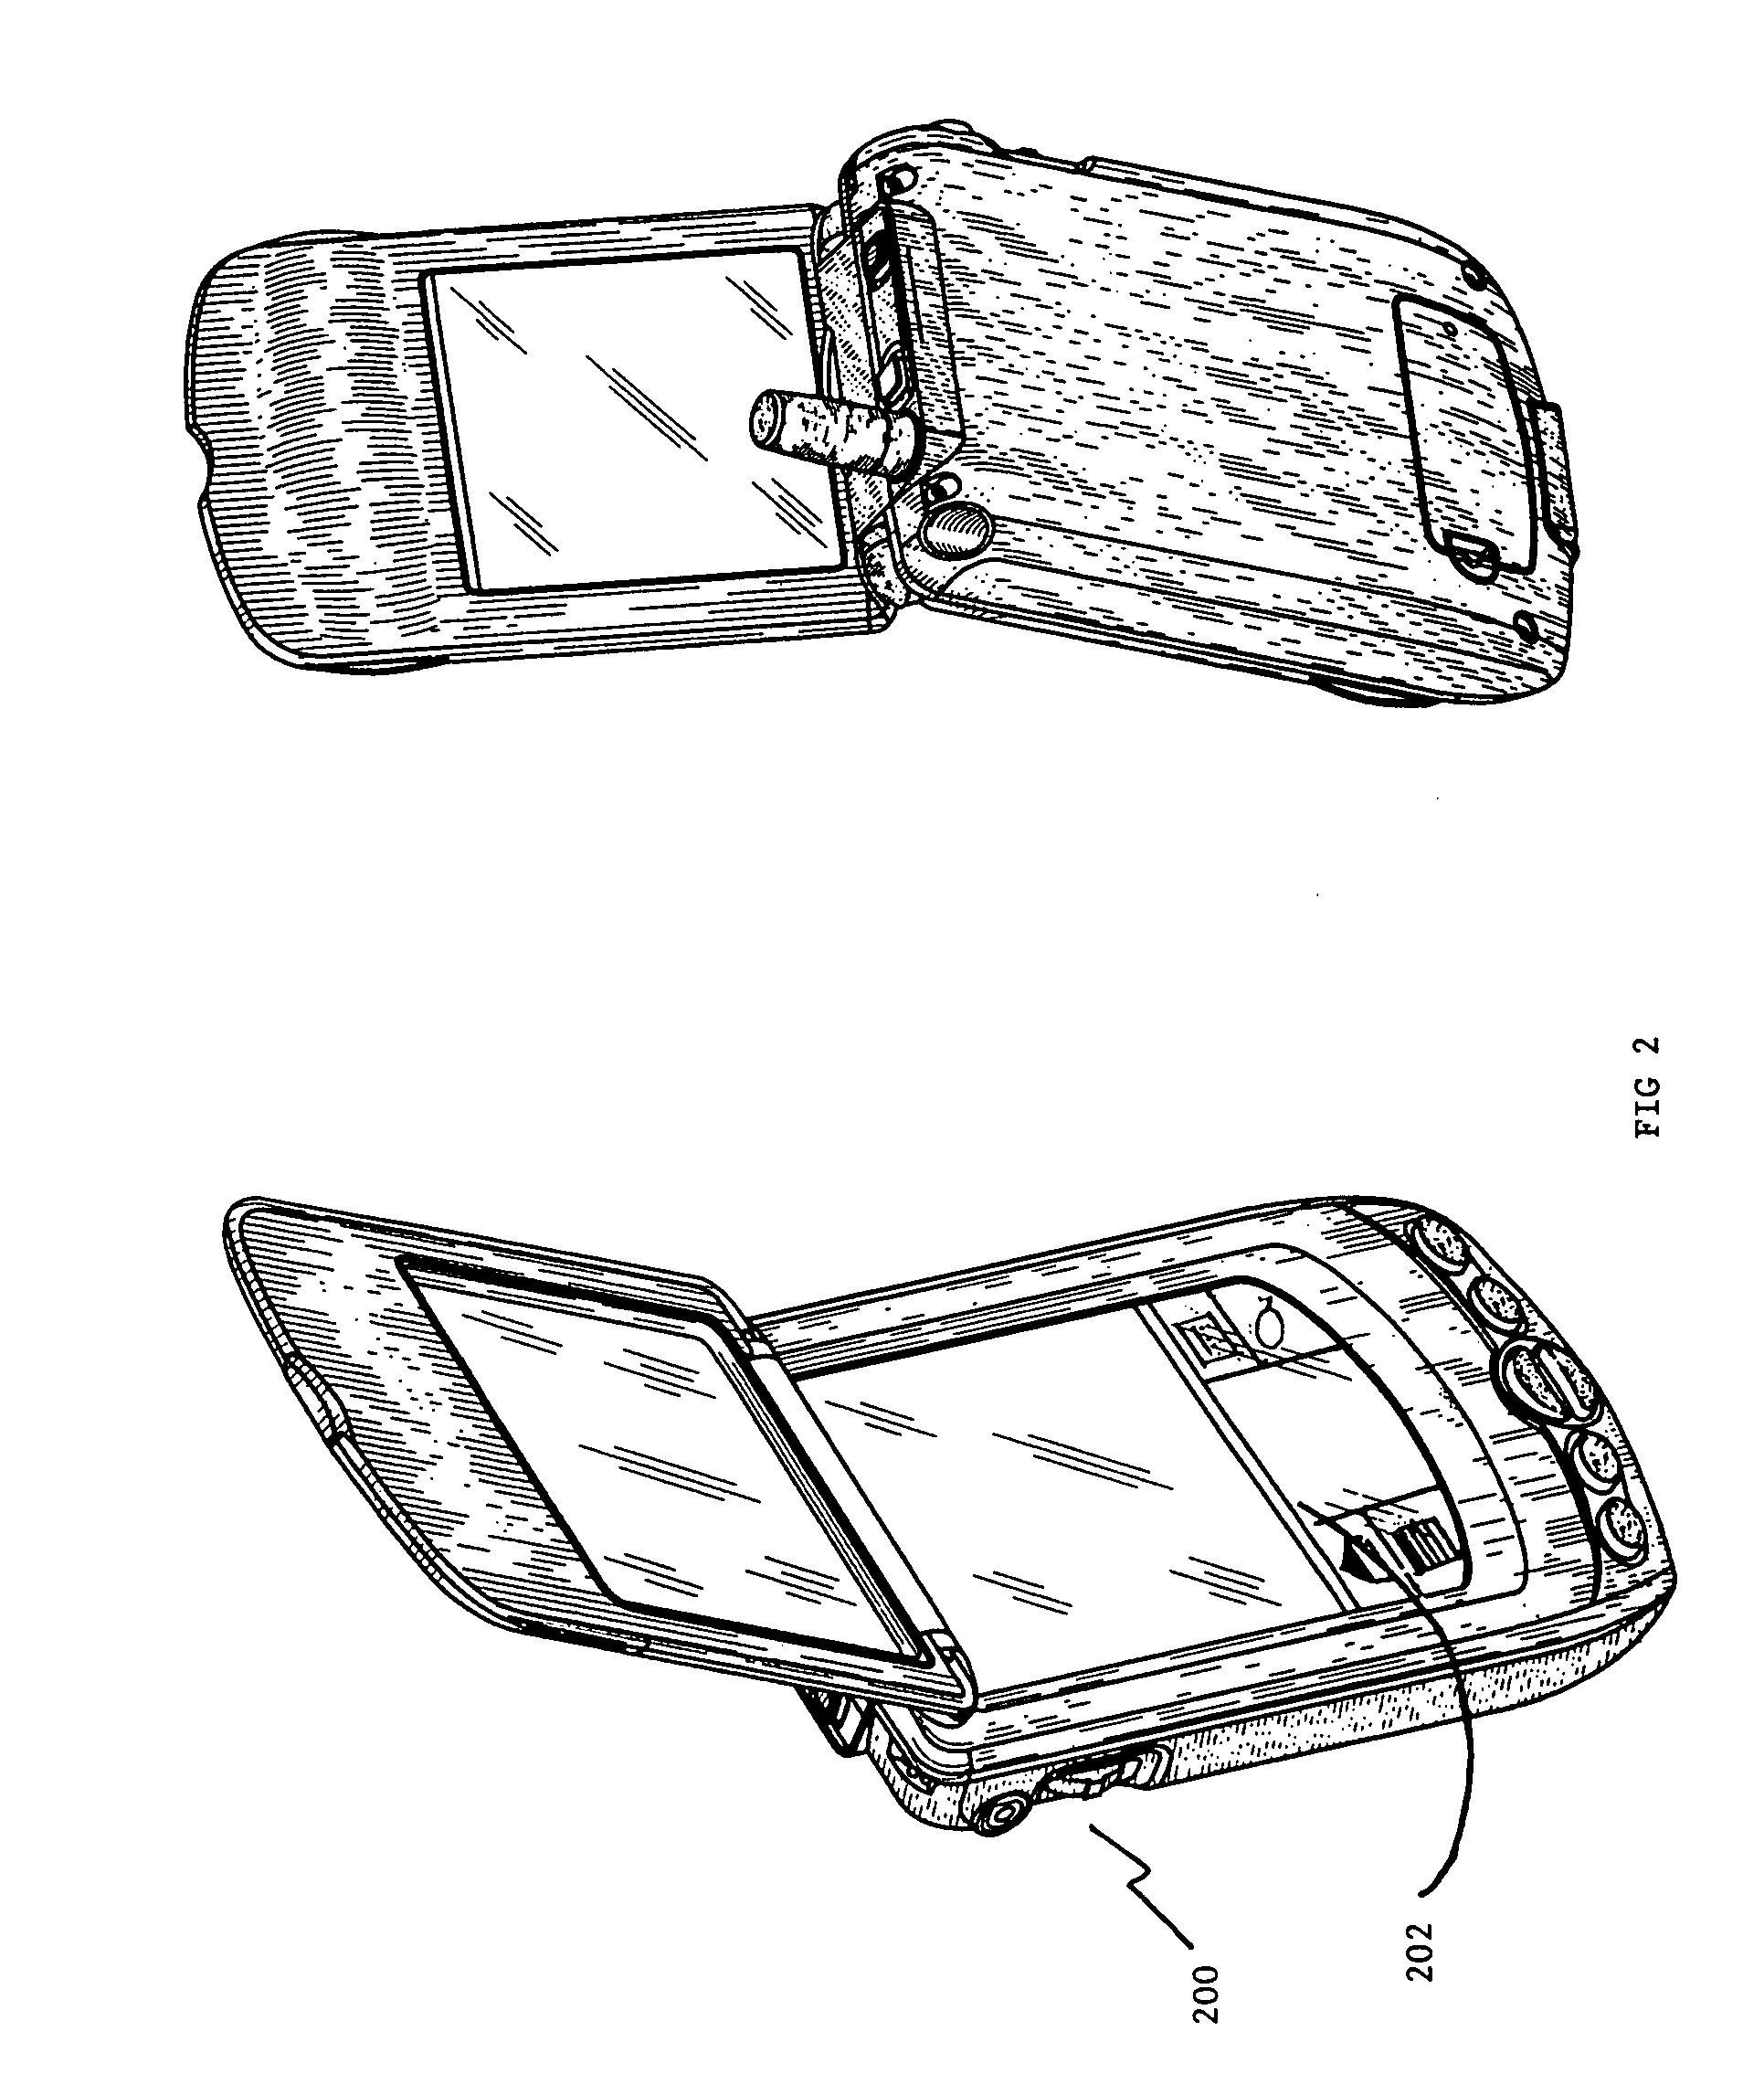 Integrated personal digital assistant device